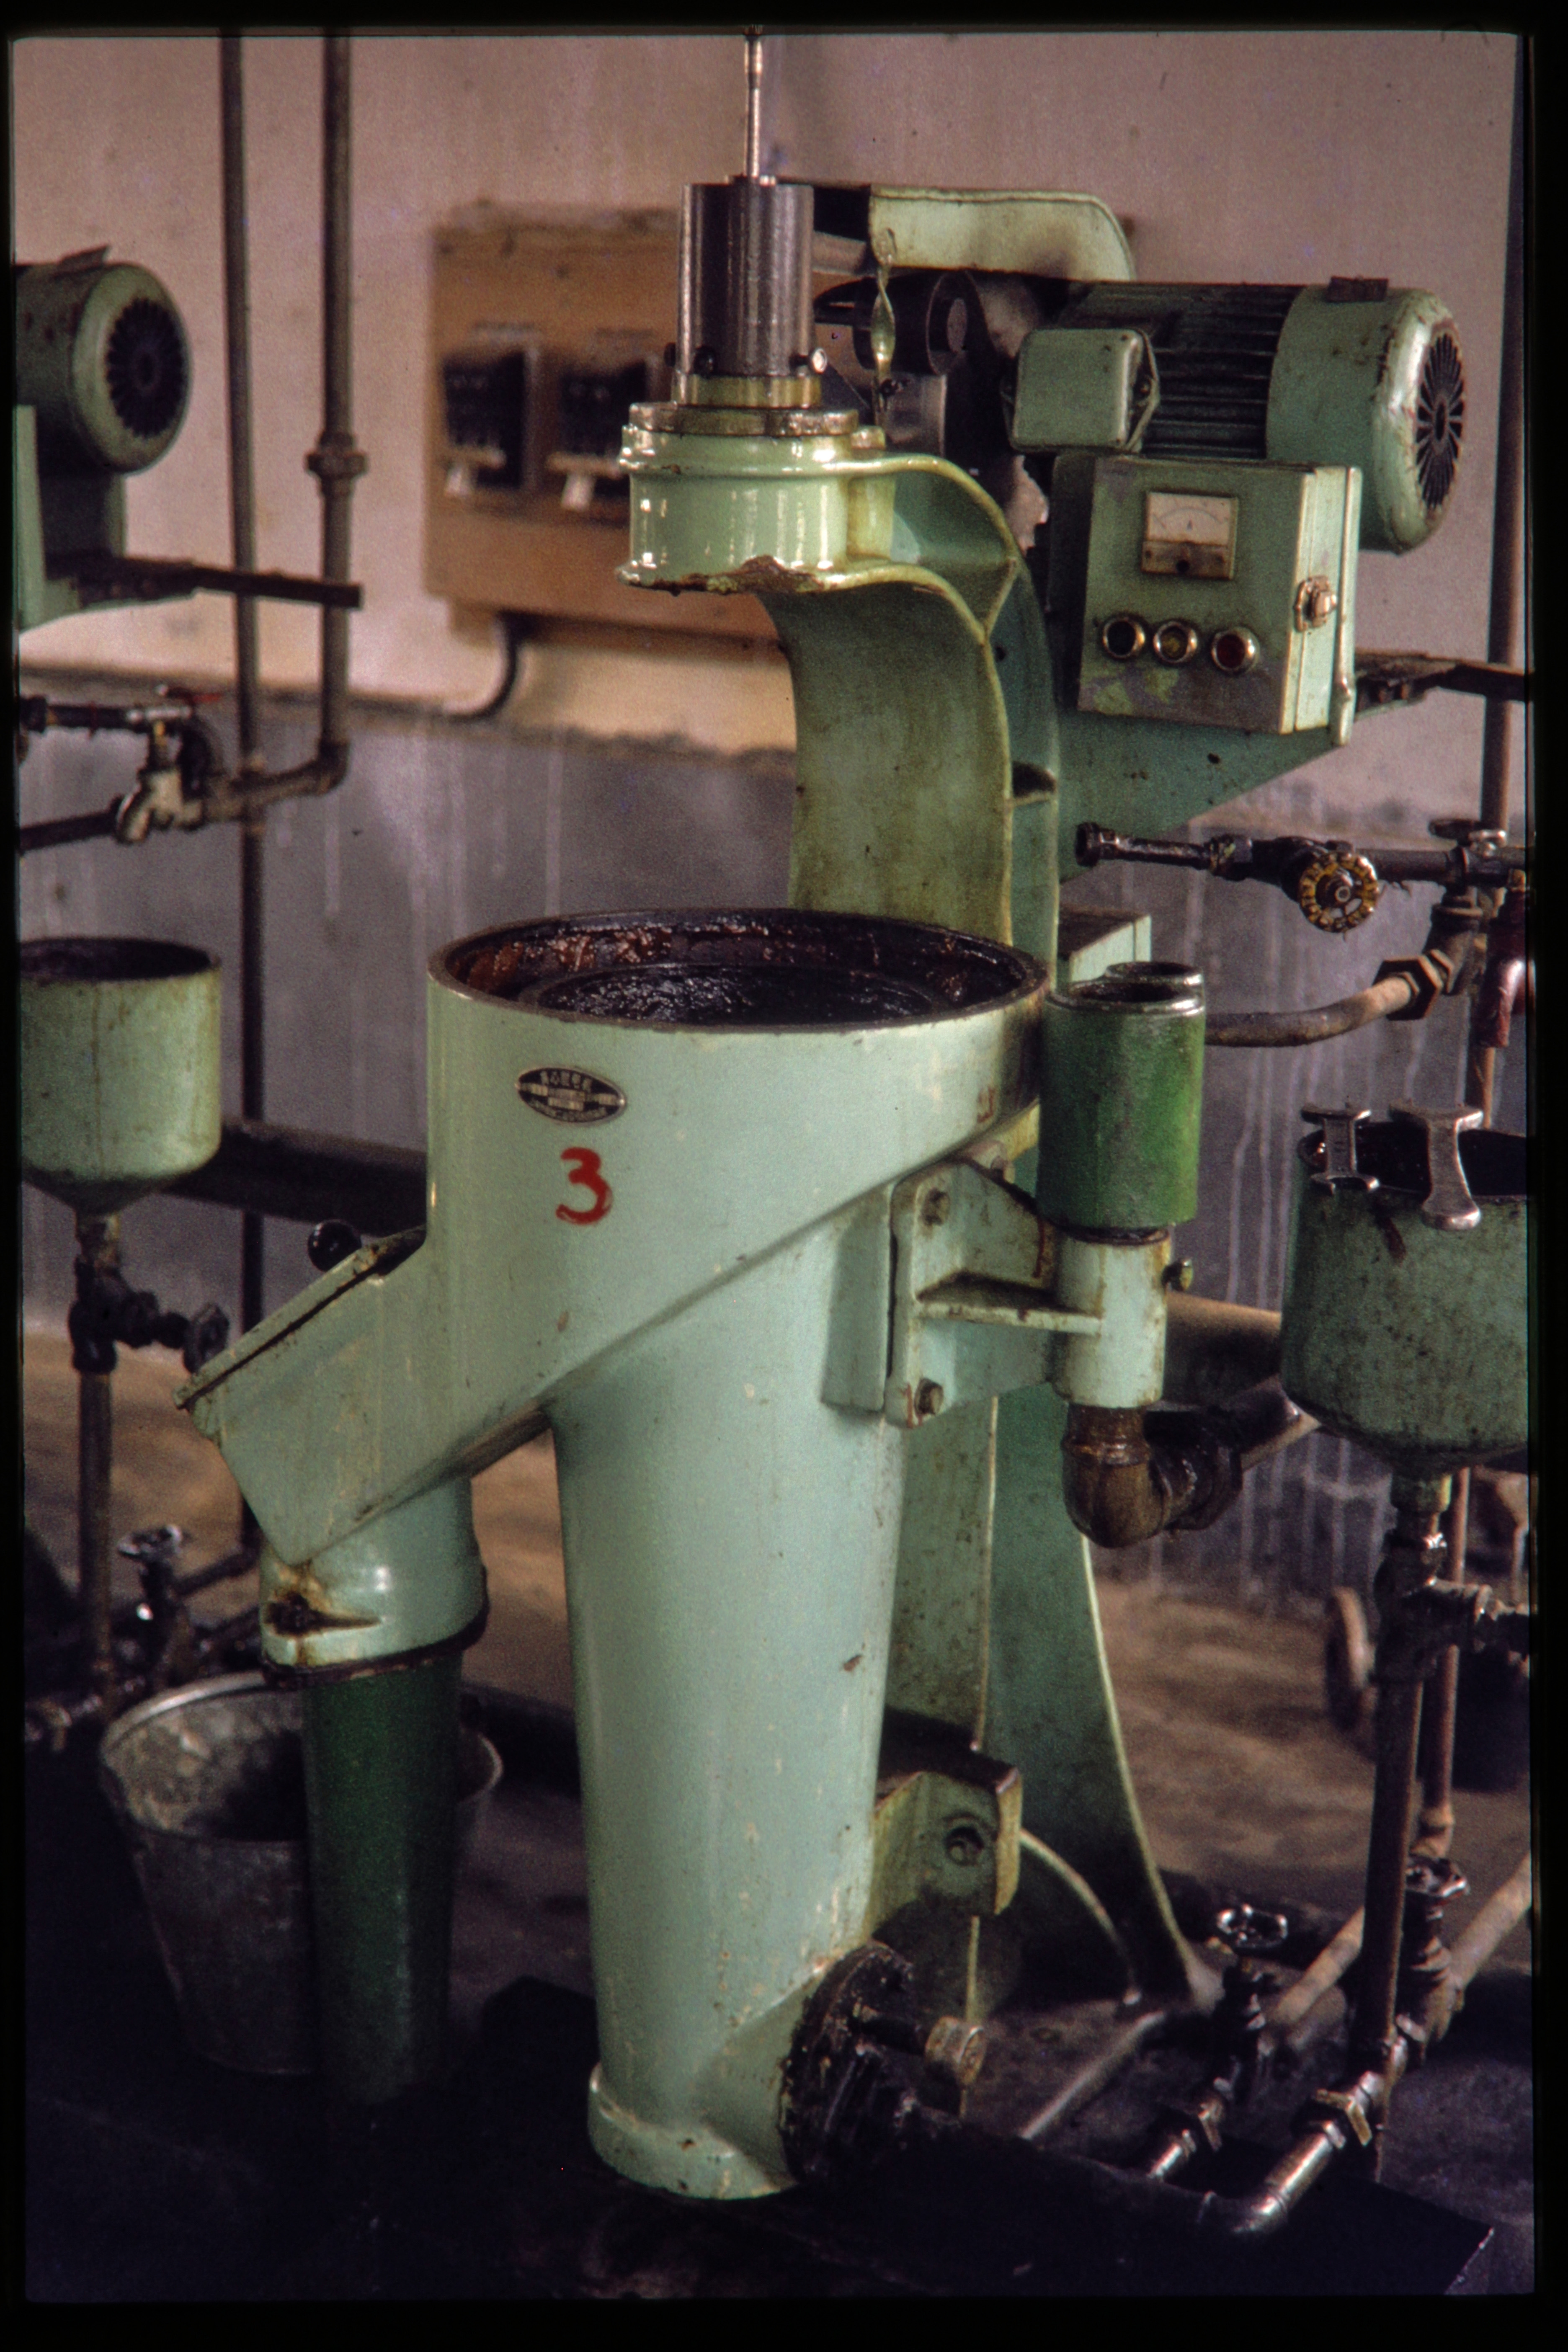 Depiction of Oil processing plant machinery, June 1978